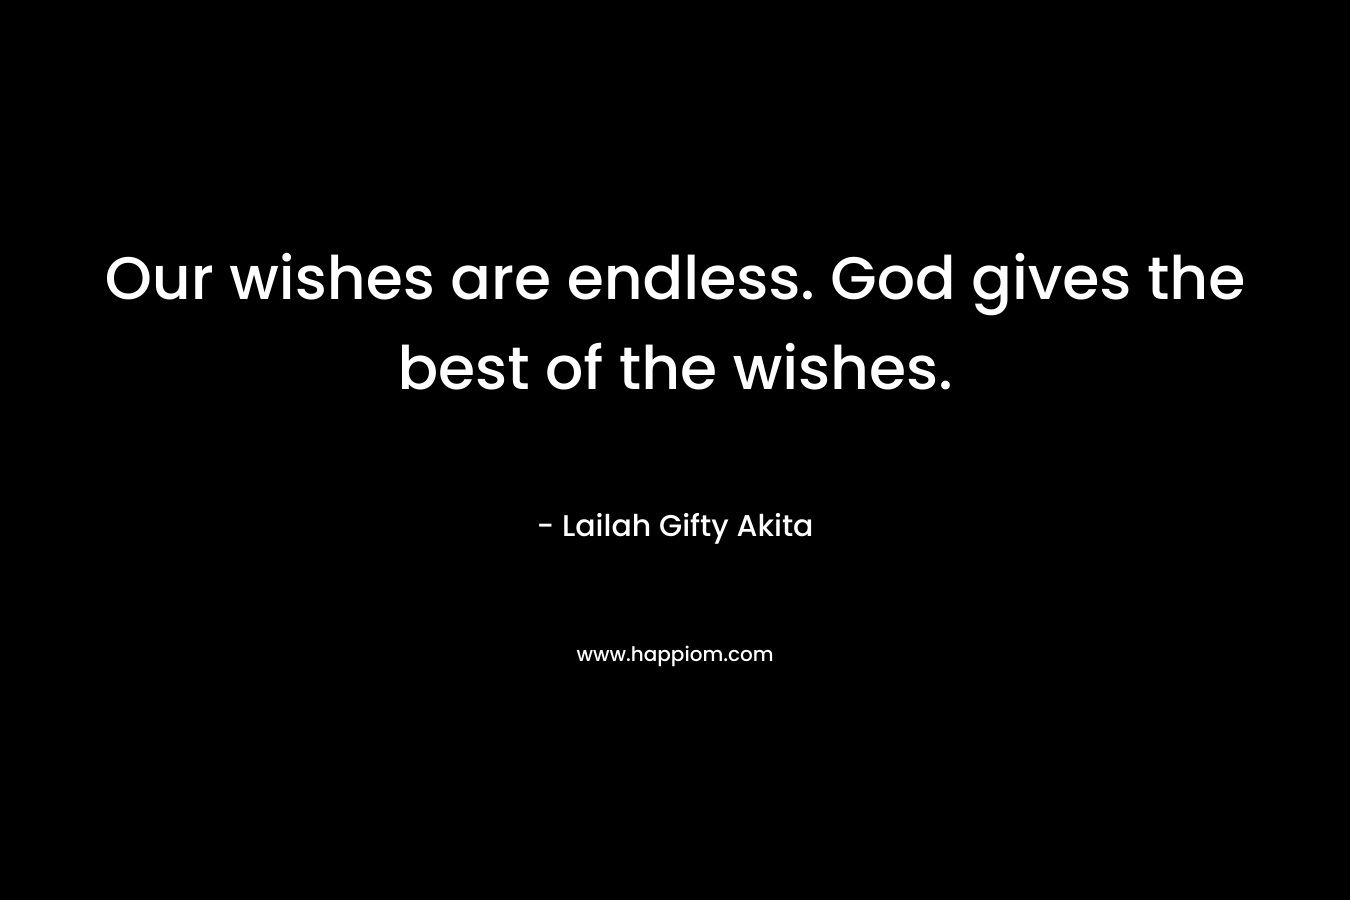 Our wishes are endless. God gives the best of the wishes.